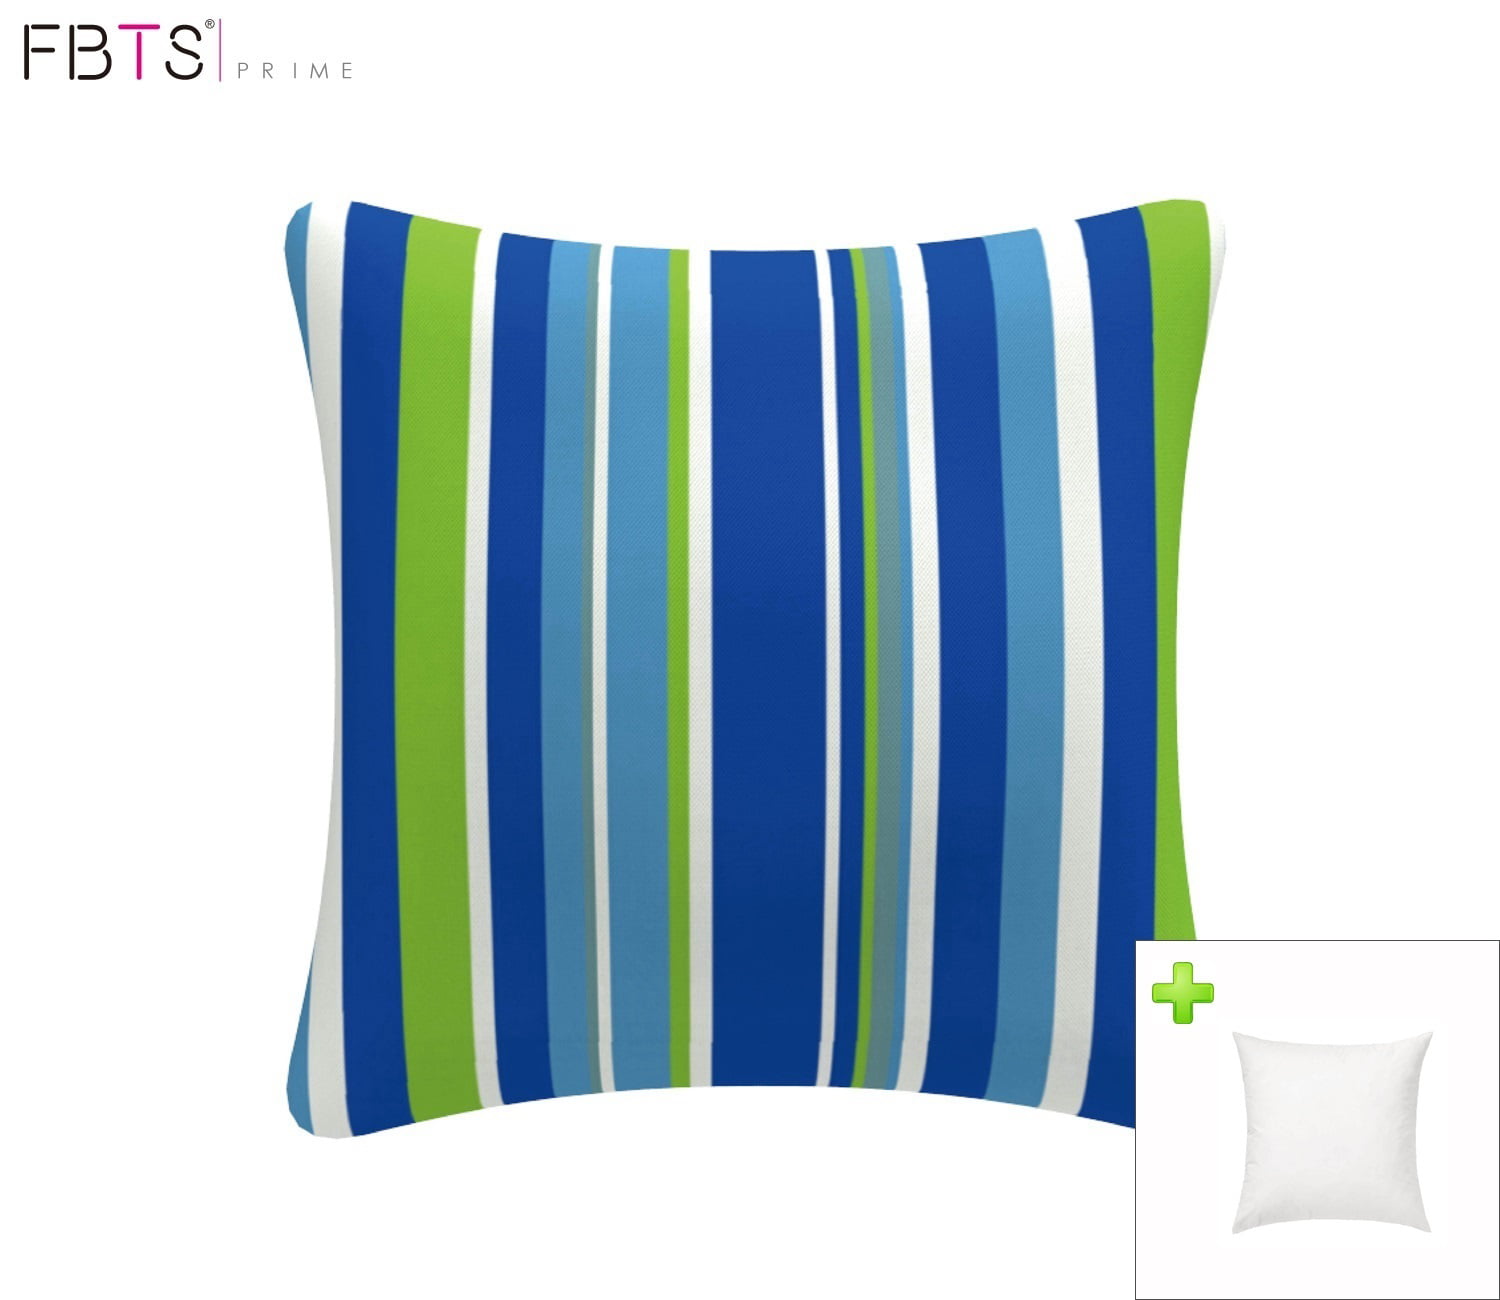 FBTS Prime Outdoor Decorative Pillows with Insert Blue and White Stripe Patio Accent Pillows